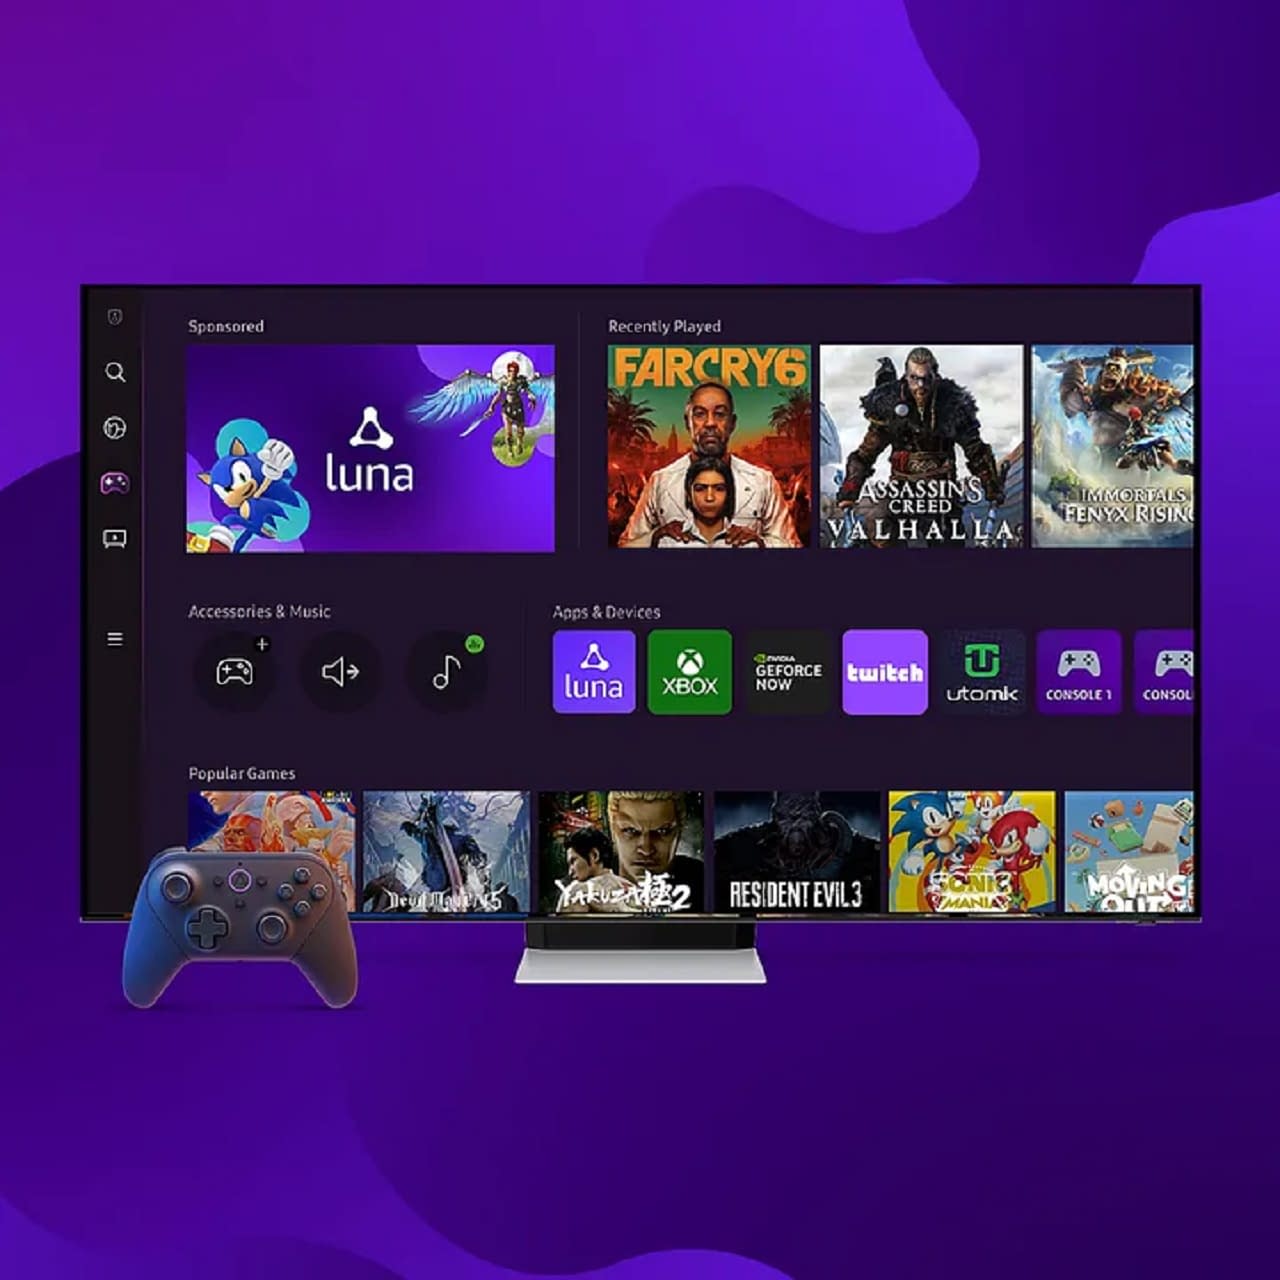 Select Samsung TVs Come With 3 Free Months of Xbox Game Pass